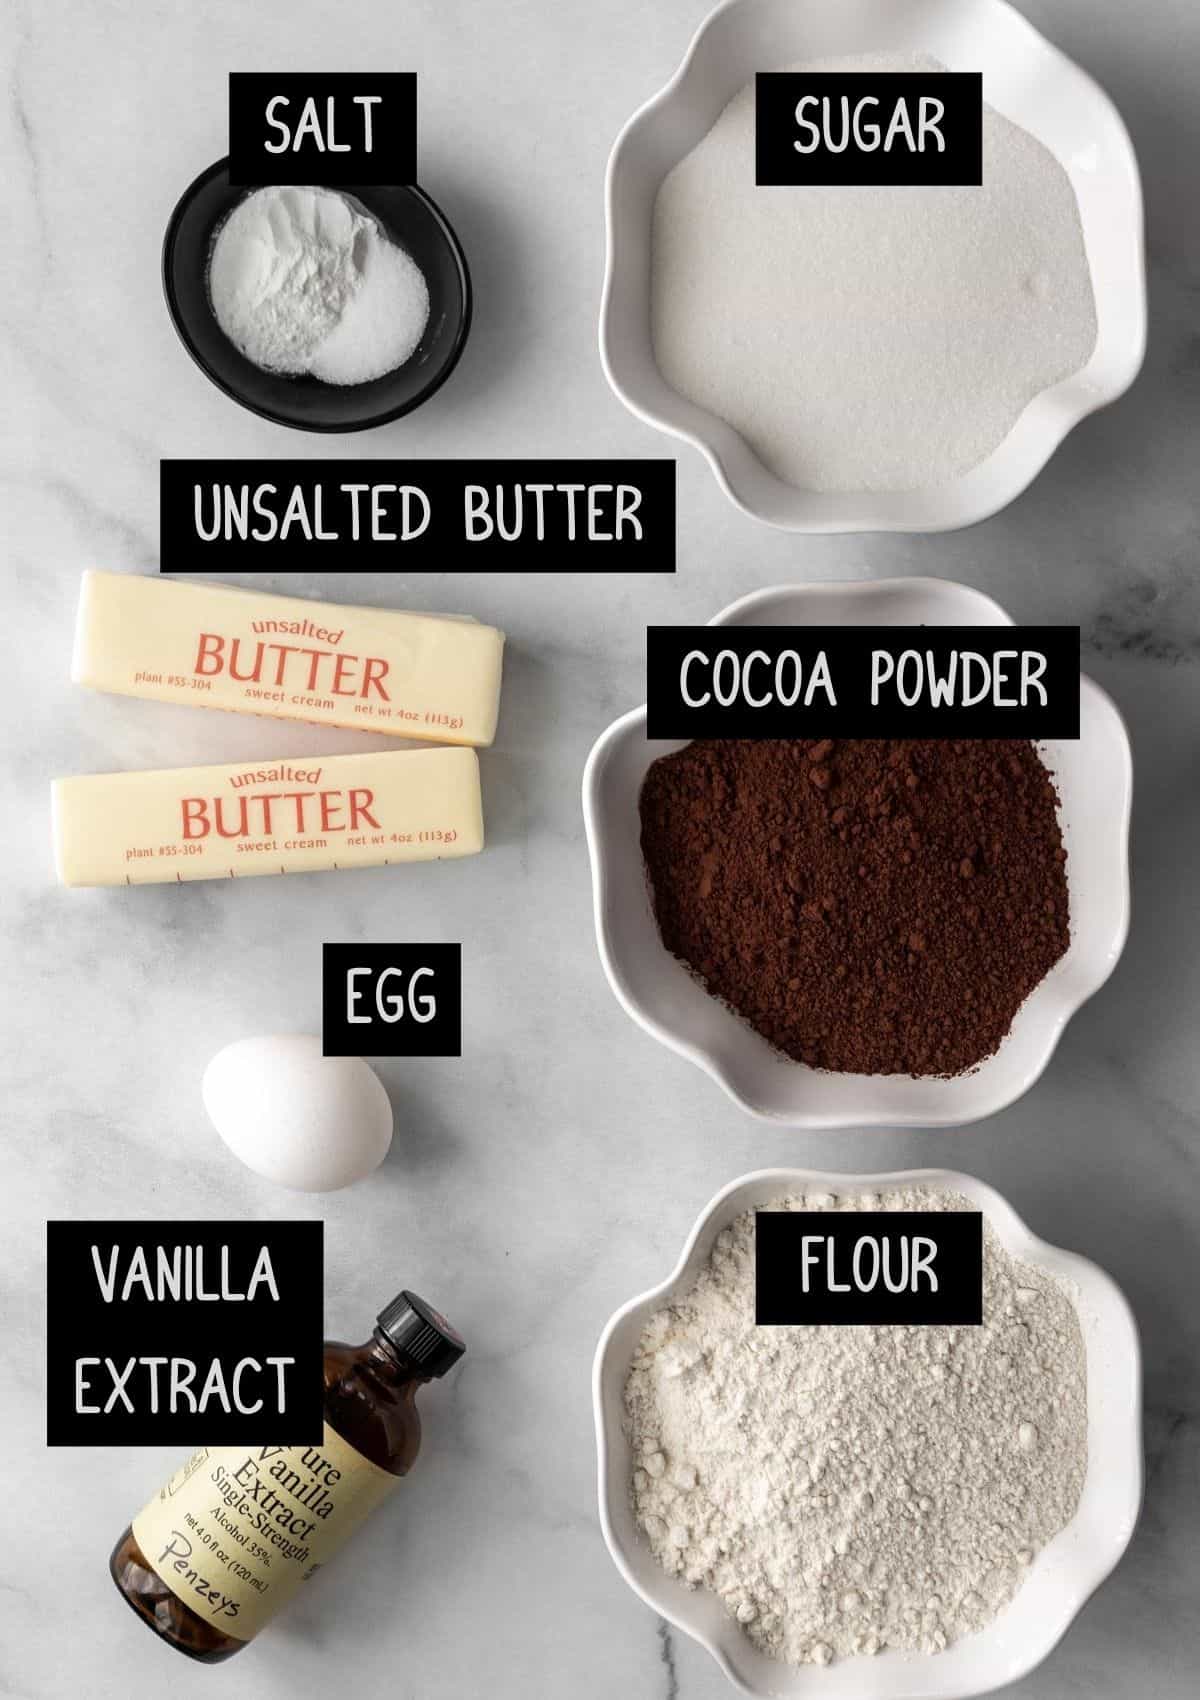 Labelled ingredients for the chocolate dough (see recipe for details).